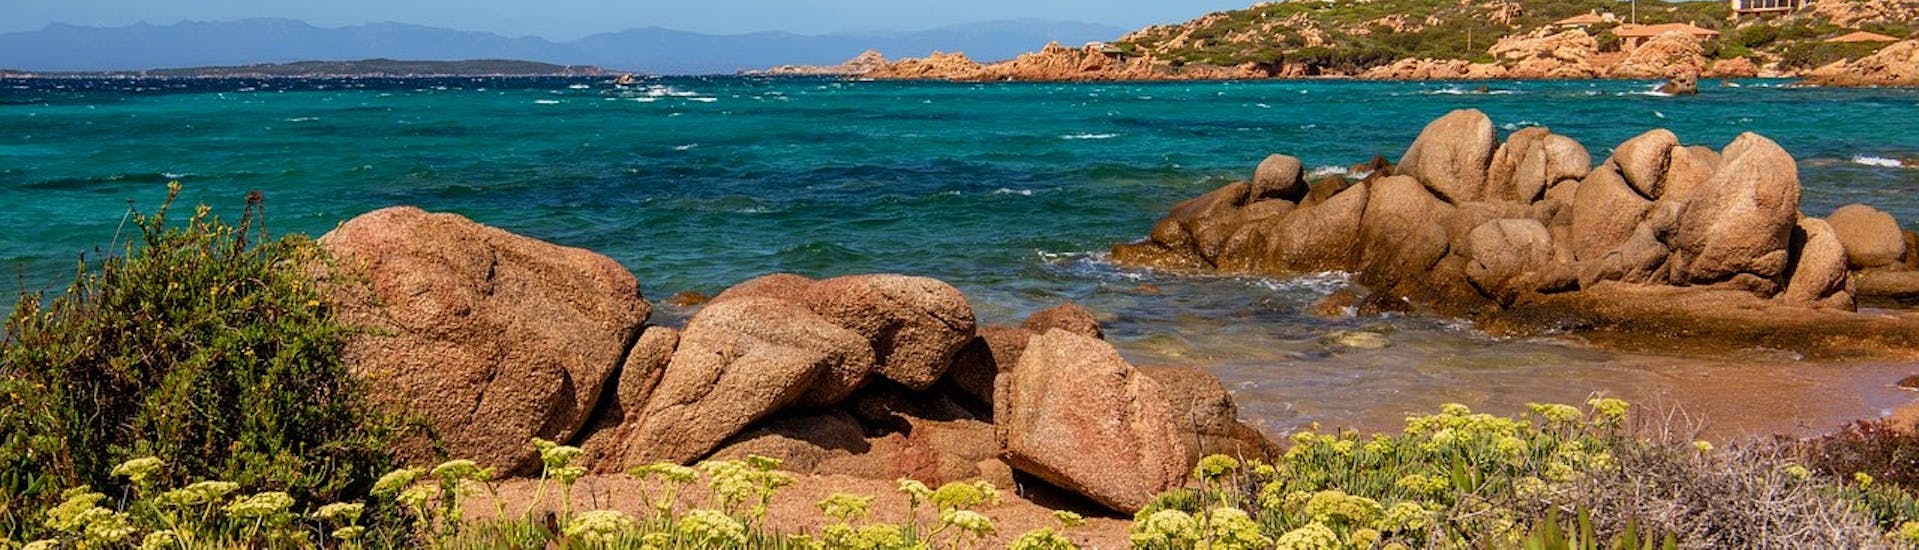 One of the most beautiful beaches in the area can be visited during a private dinghy trip from Santa Teresa di Gallura to the Maddalena archipelago with Estasi Escursioni.